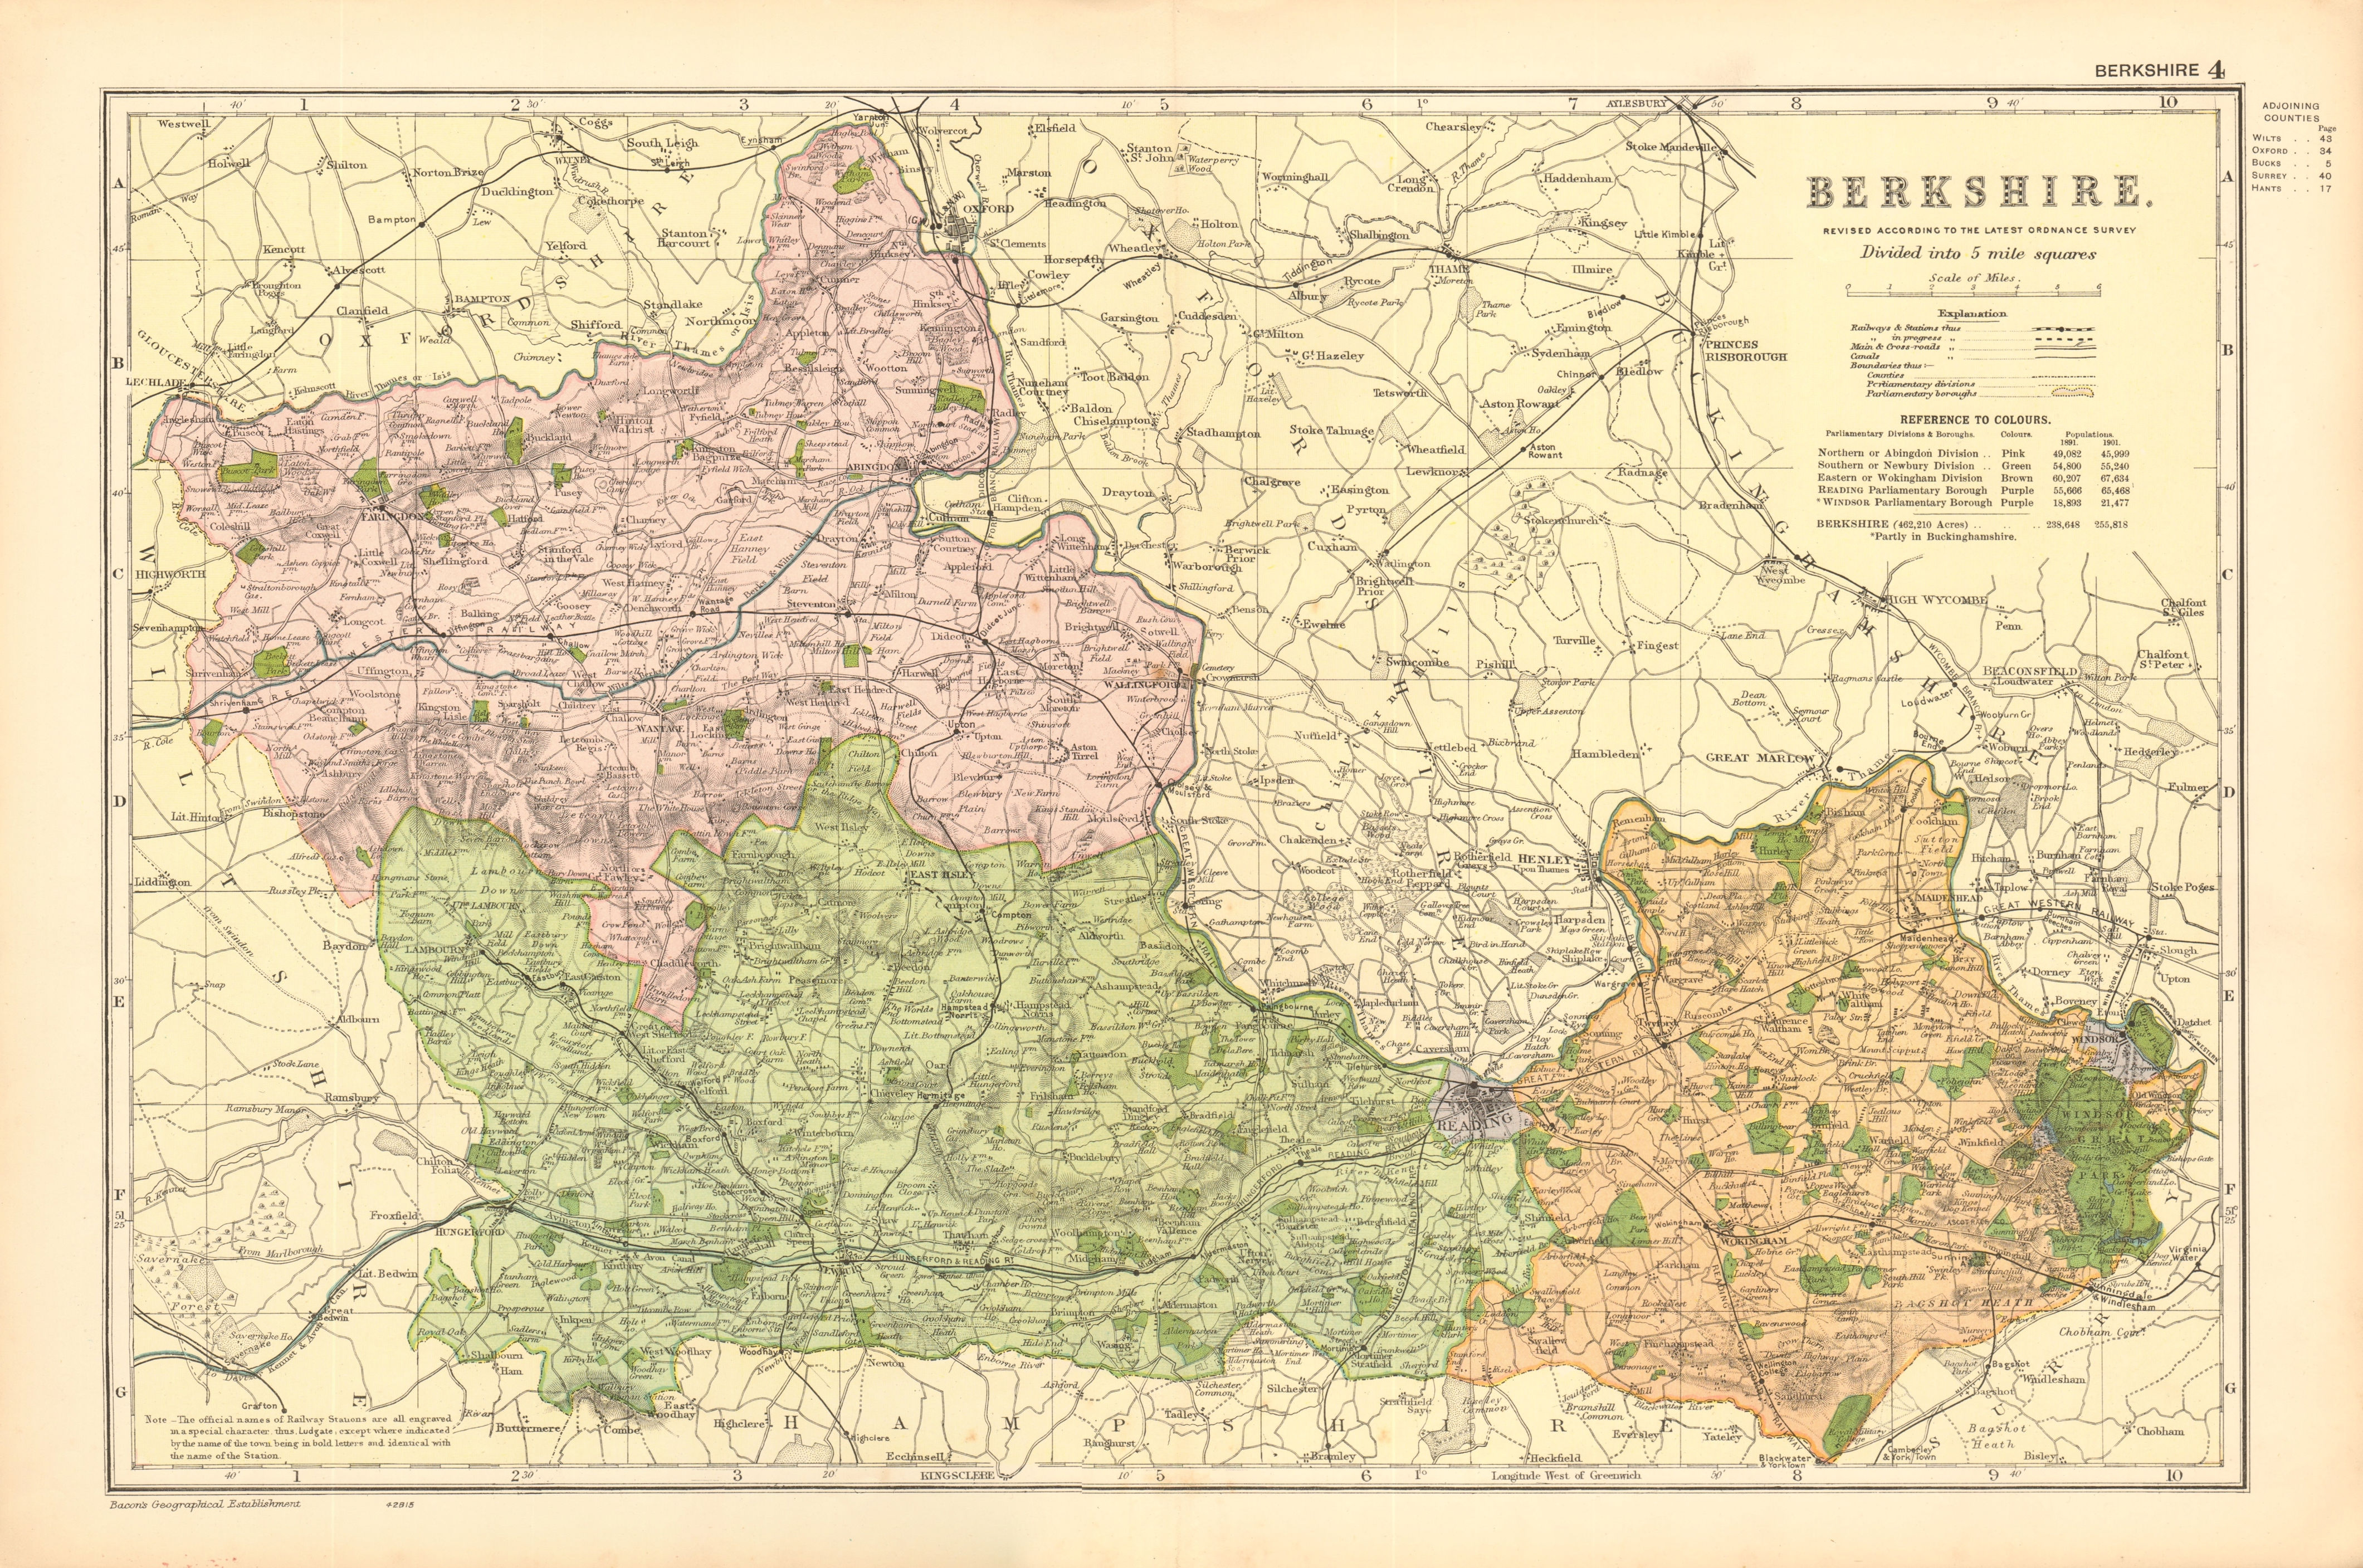 Associate Product BERKSHIRE. Showing Parliamentary divisions, boroughs & parks. BACON 1904 map